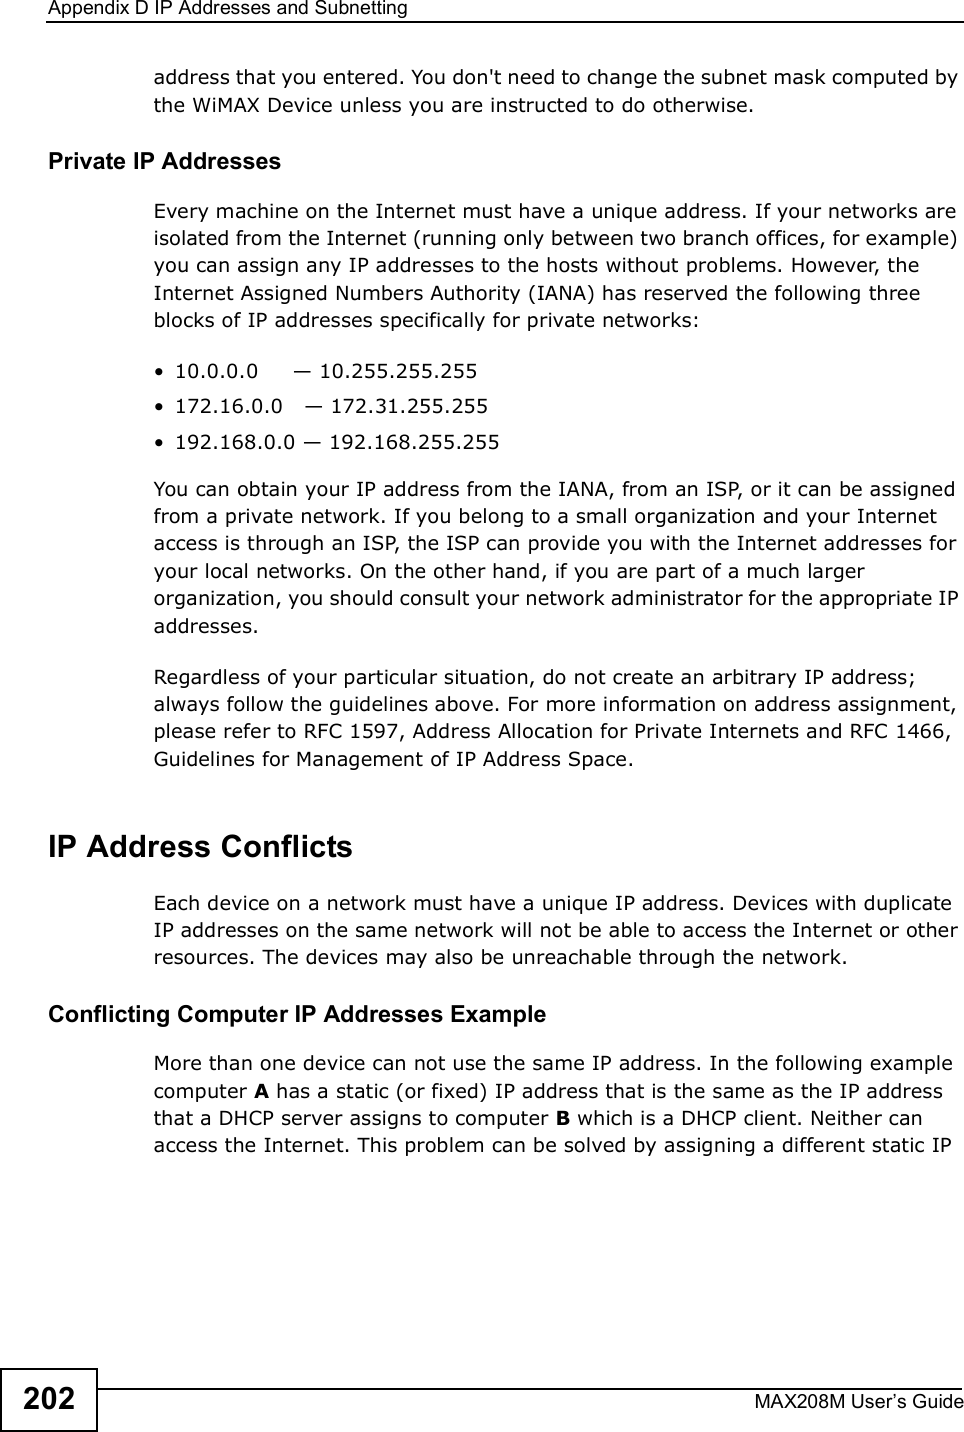 Appendix DIP Addresses and SubnettingMAX208M User s Guide202address that you entered. You don&apos;t need to change the subnet mask computed by the WiMAX Device unless you are instructed to do otherwise.Private IP AddressesEvery machine on the Internet must have a unique address. If your networks are isolated from the Internet (running only between two branch offices, for example) you can assign any IP addresses to the hosts without problems. However, the Internet Assigned Numbers Authority (IANA) has reserved the following three blocks of IP addresses specifically for private networks:!10.0.0.0     * 10.255.255.255!172.16.0.0   * 172.31.255.255!192.168.0.0 * 192.168.255.255You can obtain your IP address from the IANA, from an ISP, or it can be assigned from a private network. If you belong to a small organization and your Internet access is through an ISP, the ISP can provide you with the Internet addresses for your local networks. On the other hand, if you are part of a much larger organization, you should consult your network administrator for the appropriate IP addresses.Regardless of your particular situation, do not create an arbitrary IP address; always follow the guidelines above. For more information on address assignment, please refer to RFC 1597, Address Allocation for Private Internets and RFC 1466, Guidelines for Management of IP Address Space.IP Address ConflictsEach device on a network must have a unique IP address. Devices with duplicate IP addresses on the same network will not be able to access the Internet or other resources. The devices may also be unreachable through the network. Conflicting Computer IP Addresses ExampleMore than one device can not use the same IP address. In the following example computer A has a static (or fixed) IP address that is the same as the IP address that a DHCP server assigns to computer B which is a DHCP client. Neither can access the Internet. This problem can be solved by assigning a different static IP 